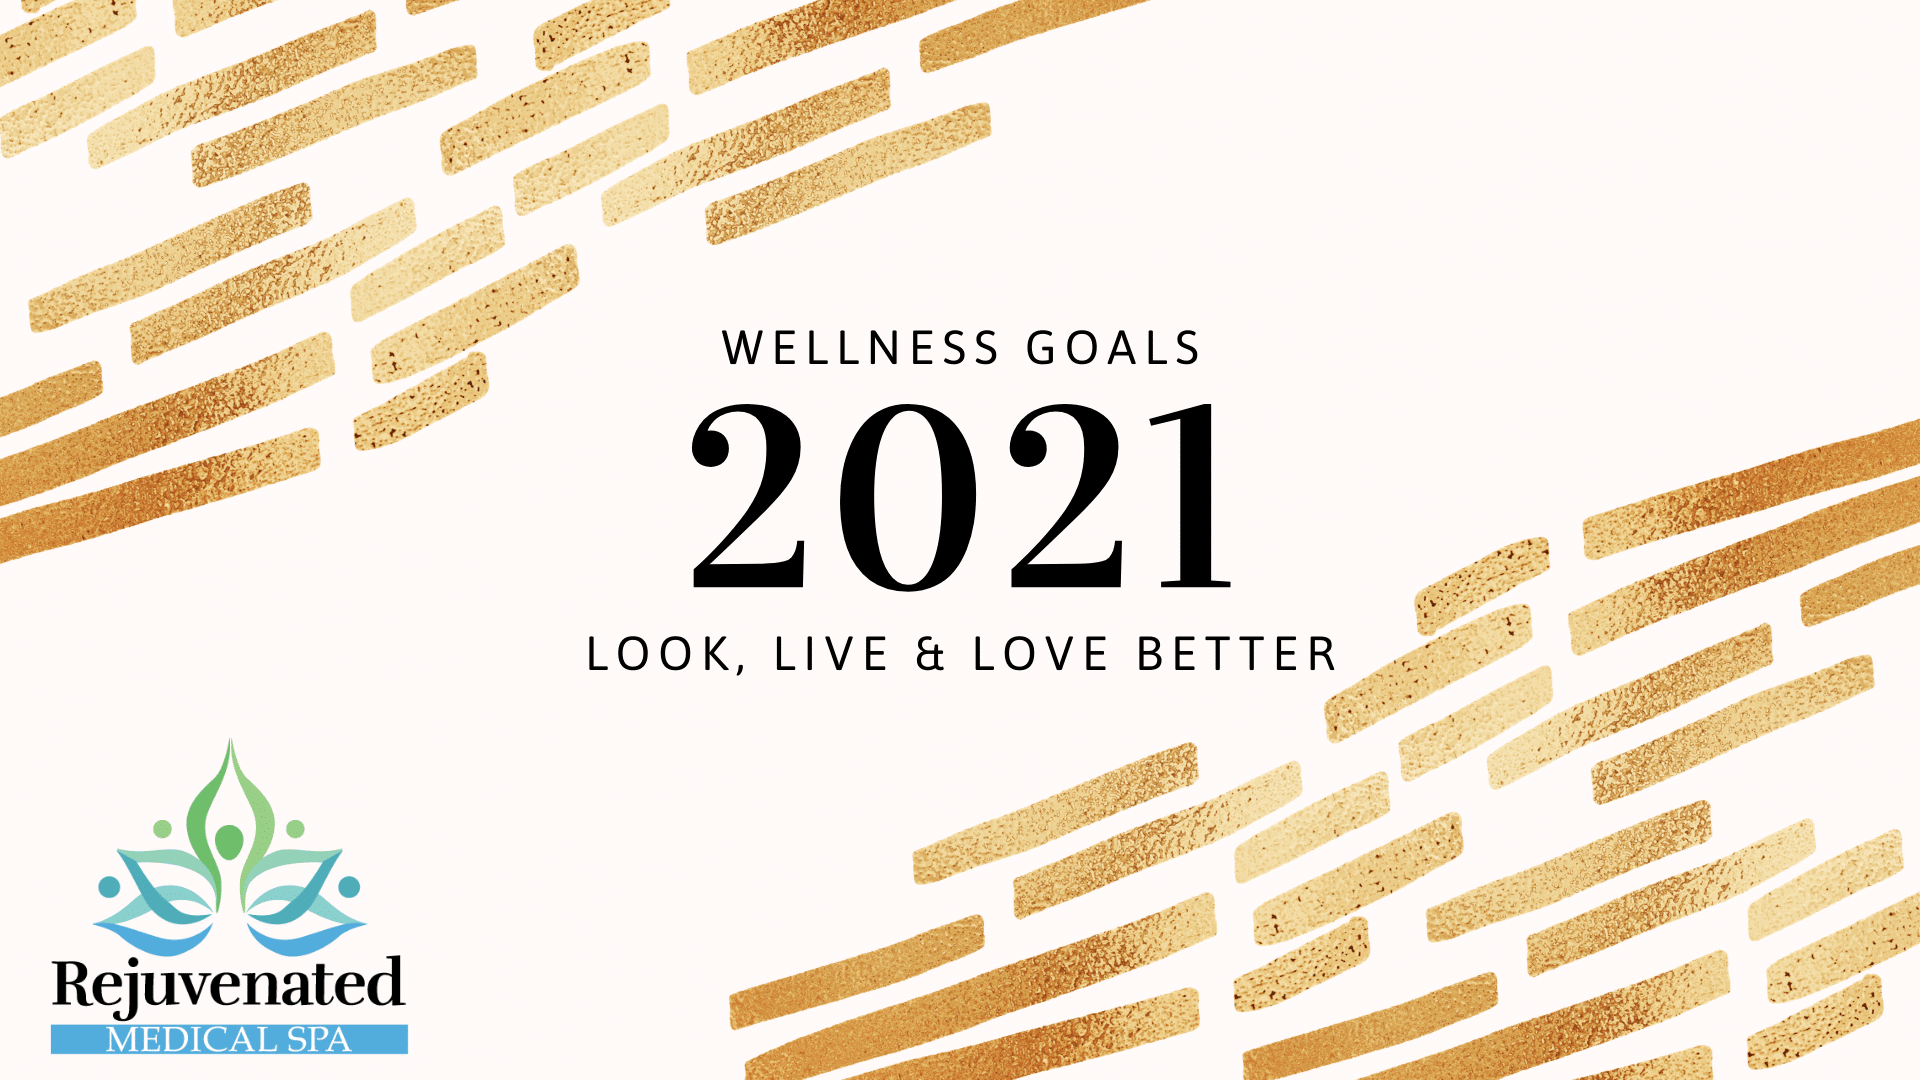 A poster for wellness goals for the year 2021.